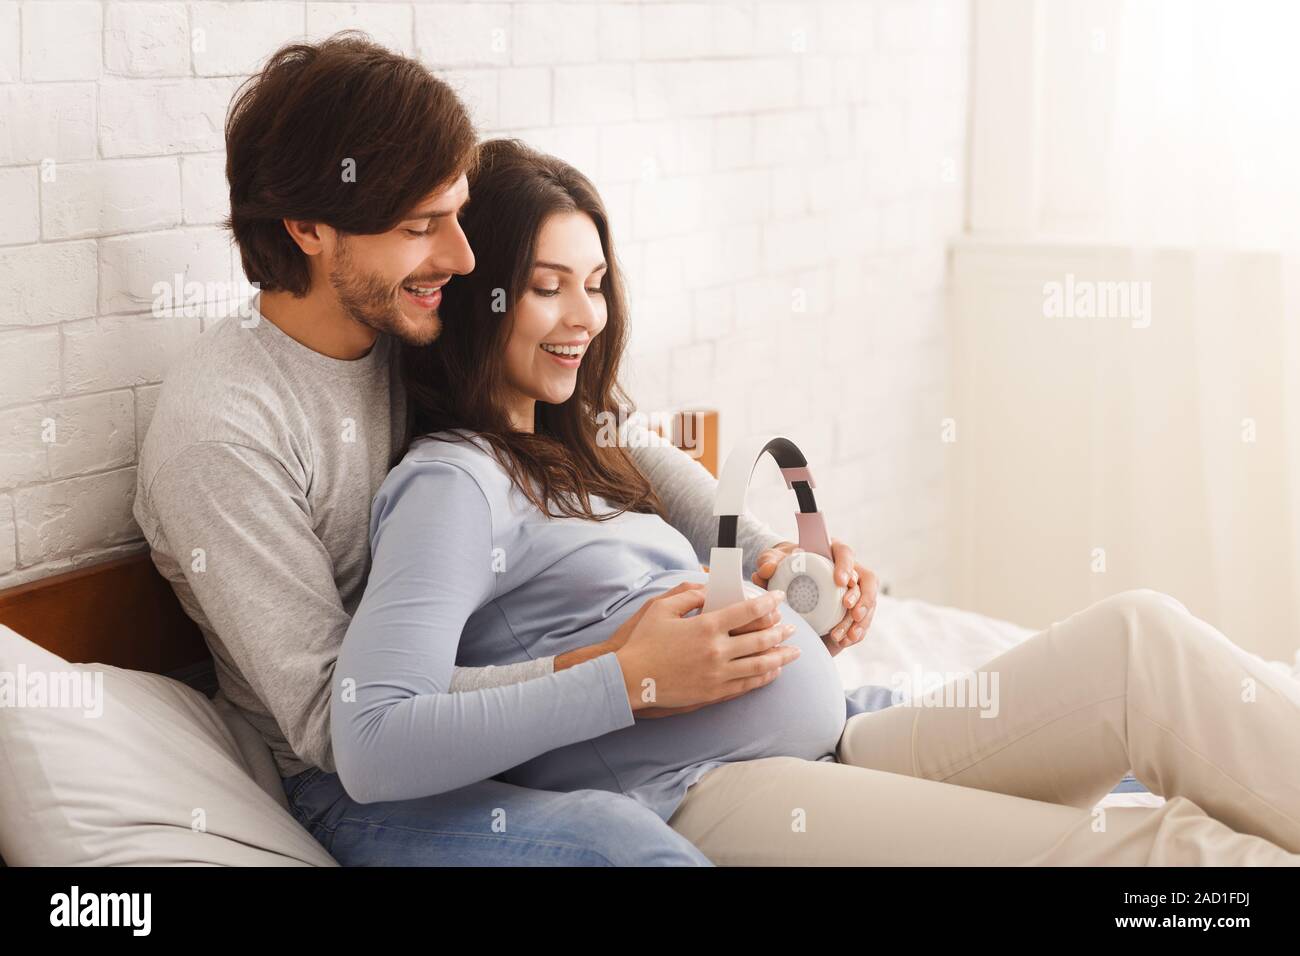 Pregnant belly with headphones Stock Photo by ©bambuh 4120747